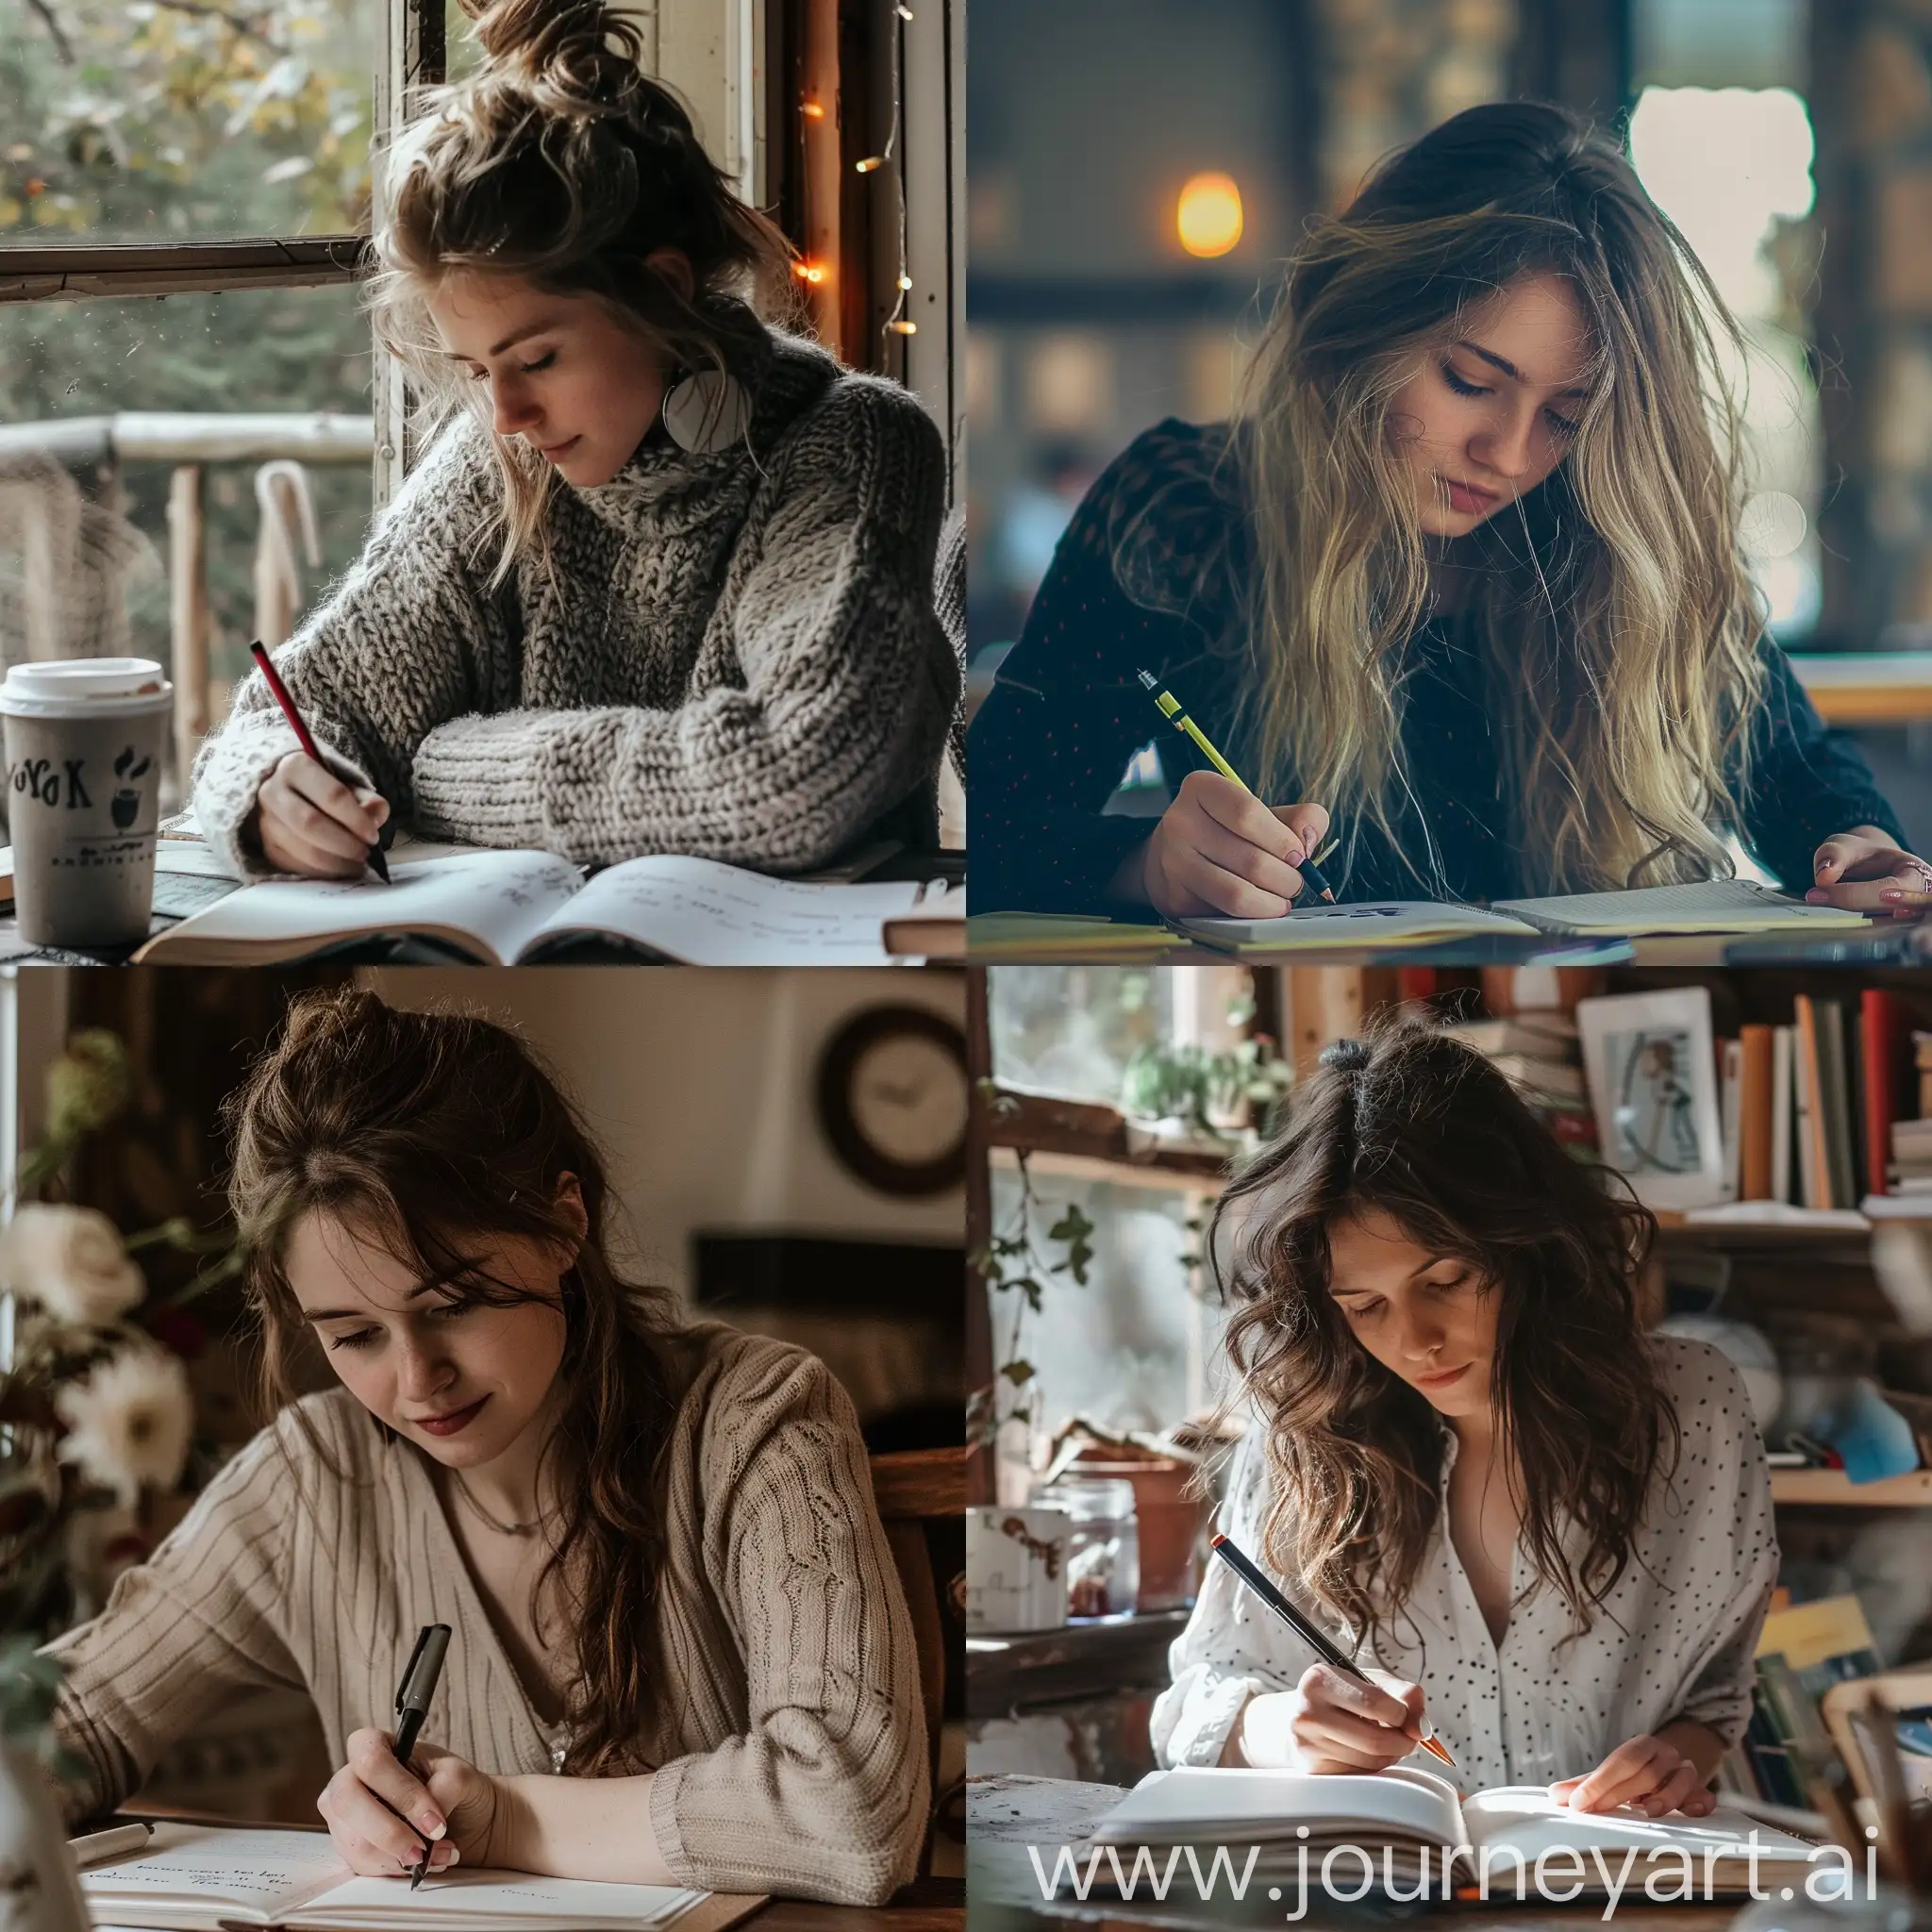 Young-Girl-Engaged-in-Writing-Activity